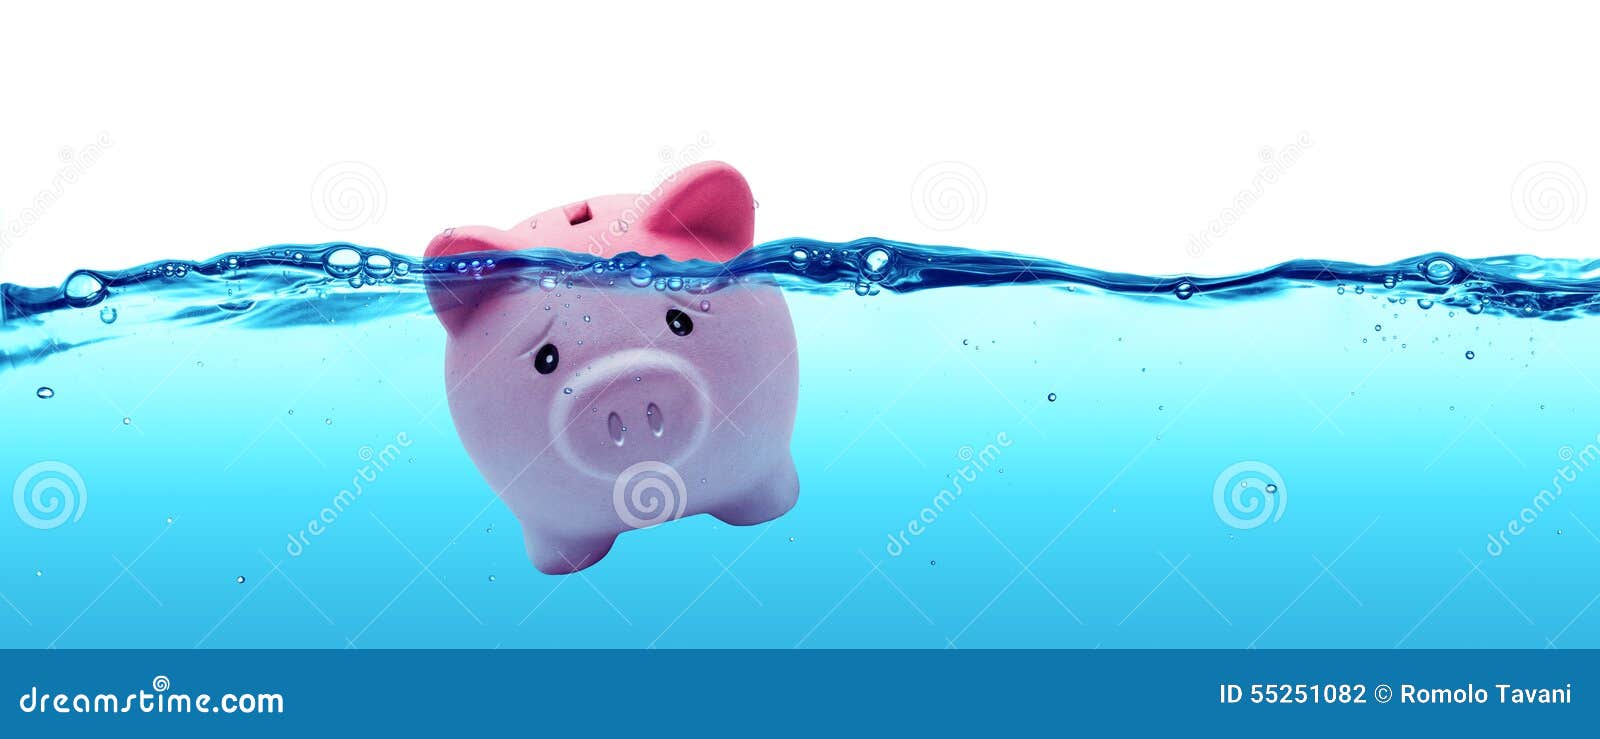 piggy bank drowning in debt